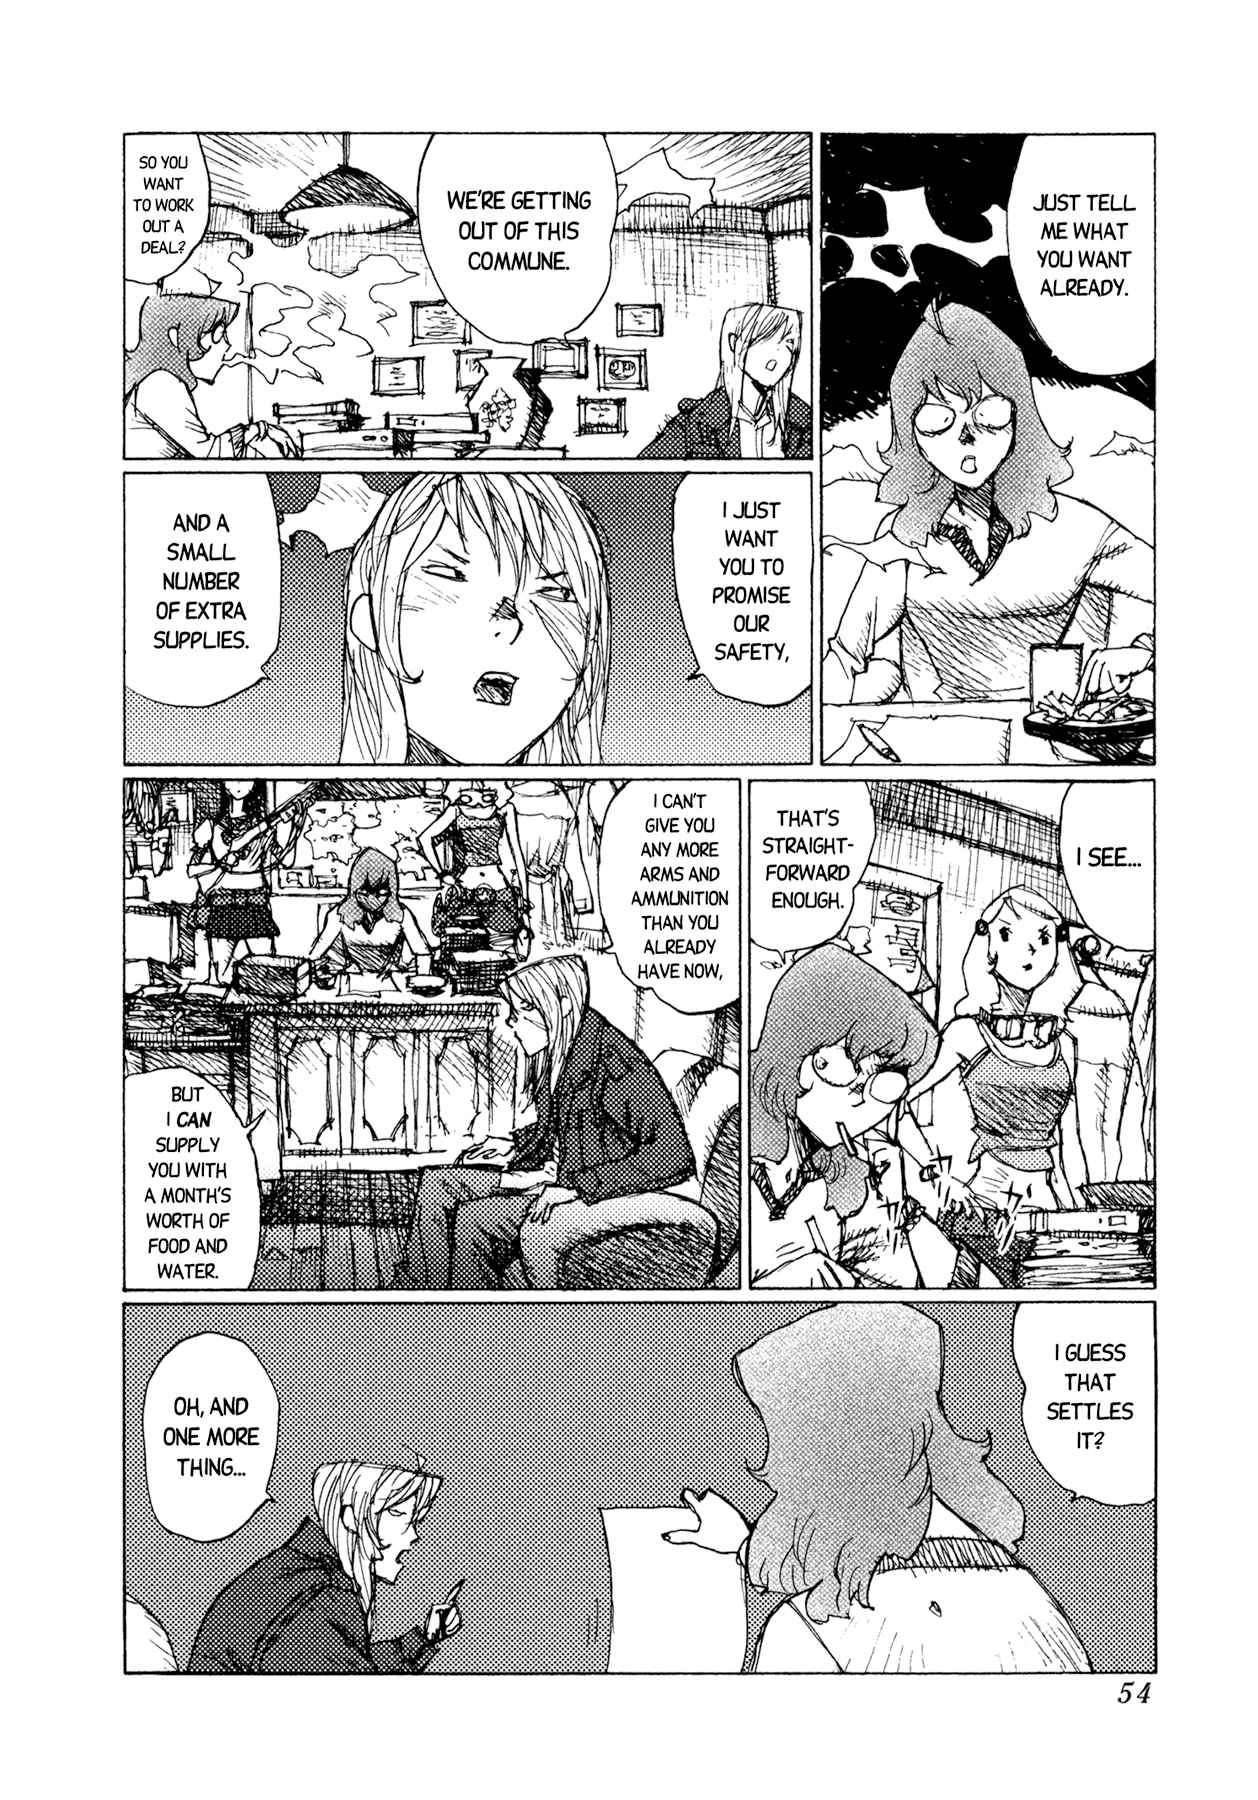 Alice in Hell Vol. 5 Ch. 31 That's Pretty Funny